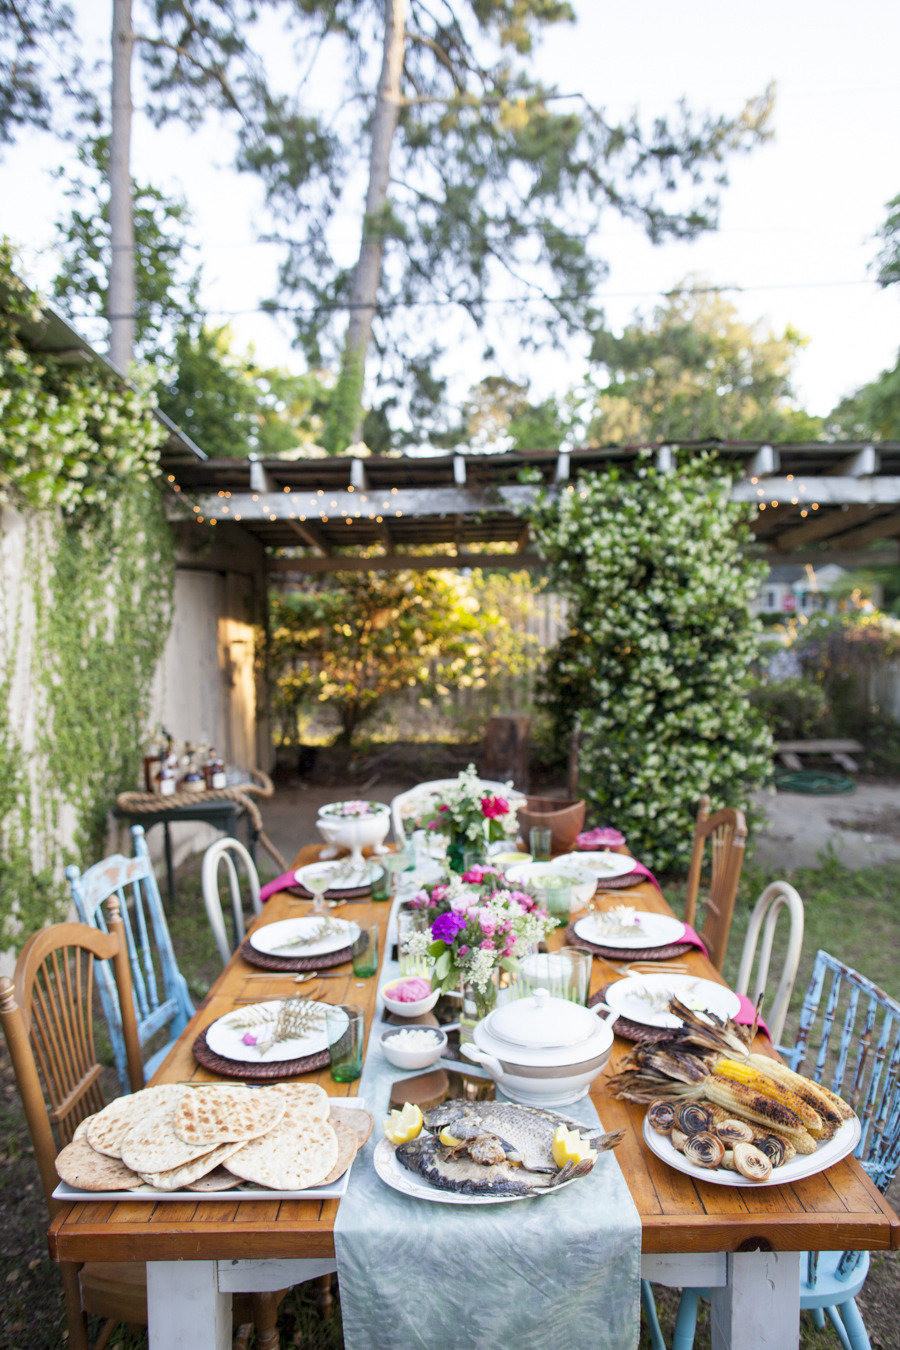 Summer Garden Party Ideas
 50 Outdoor Party Ideas You Should Try Out This Summer